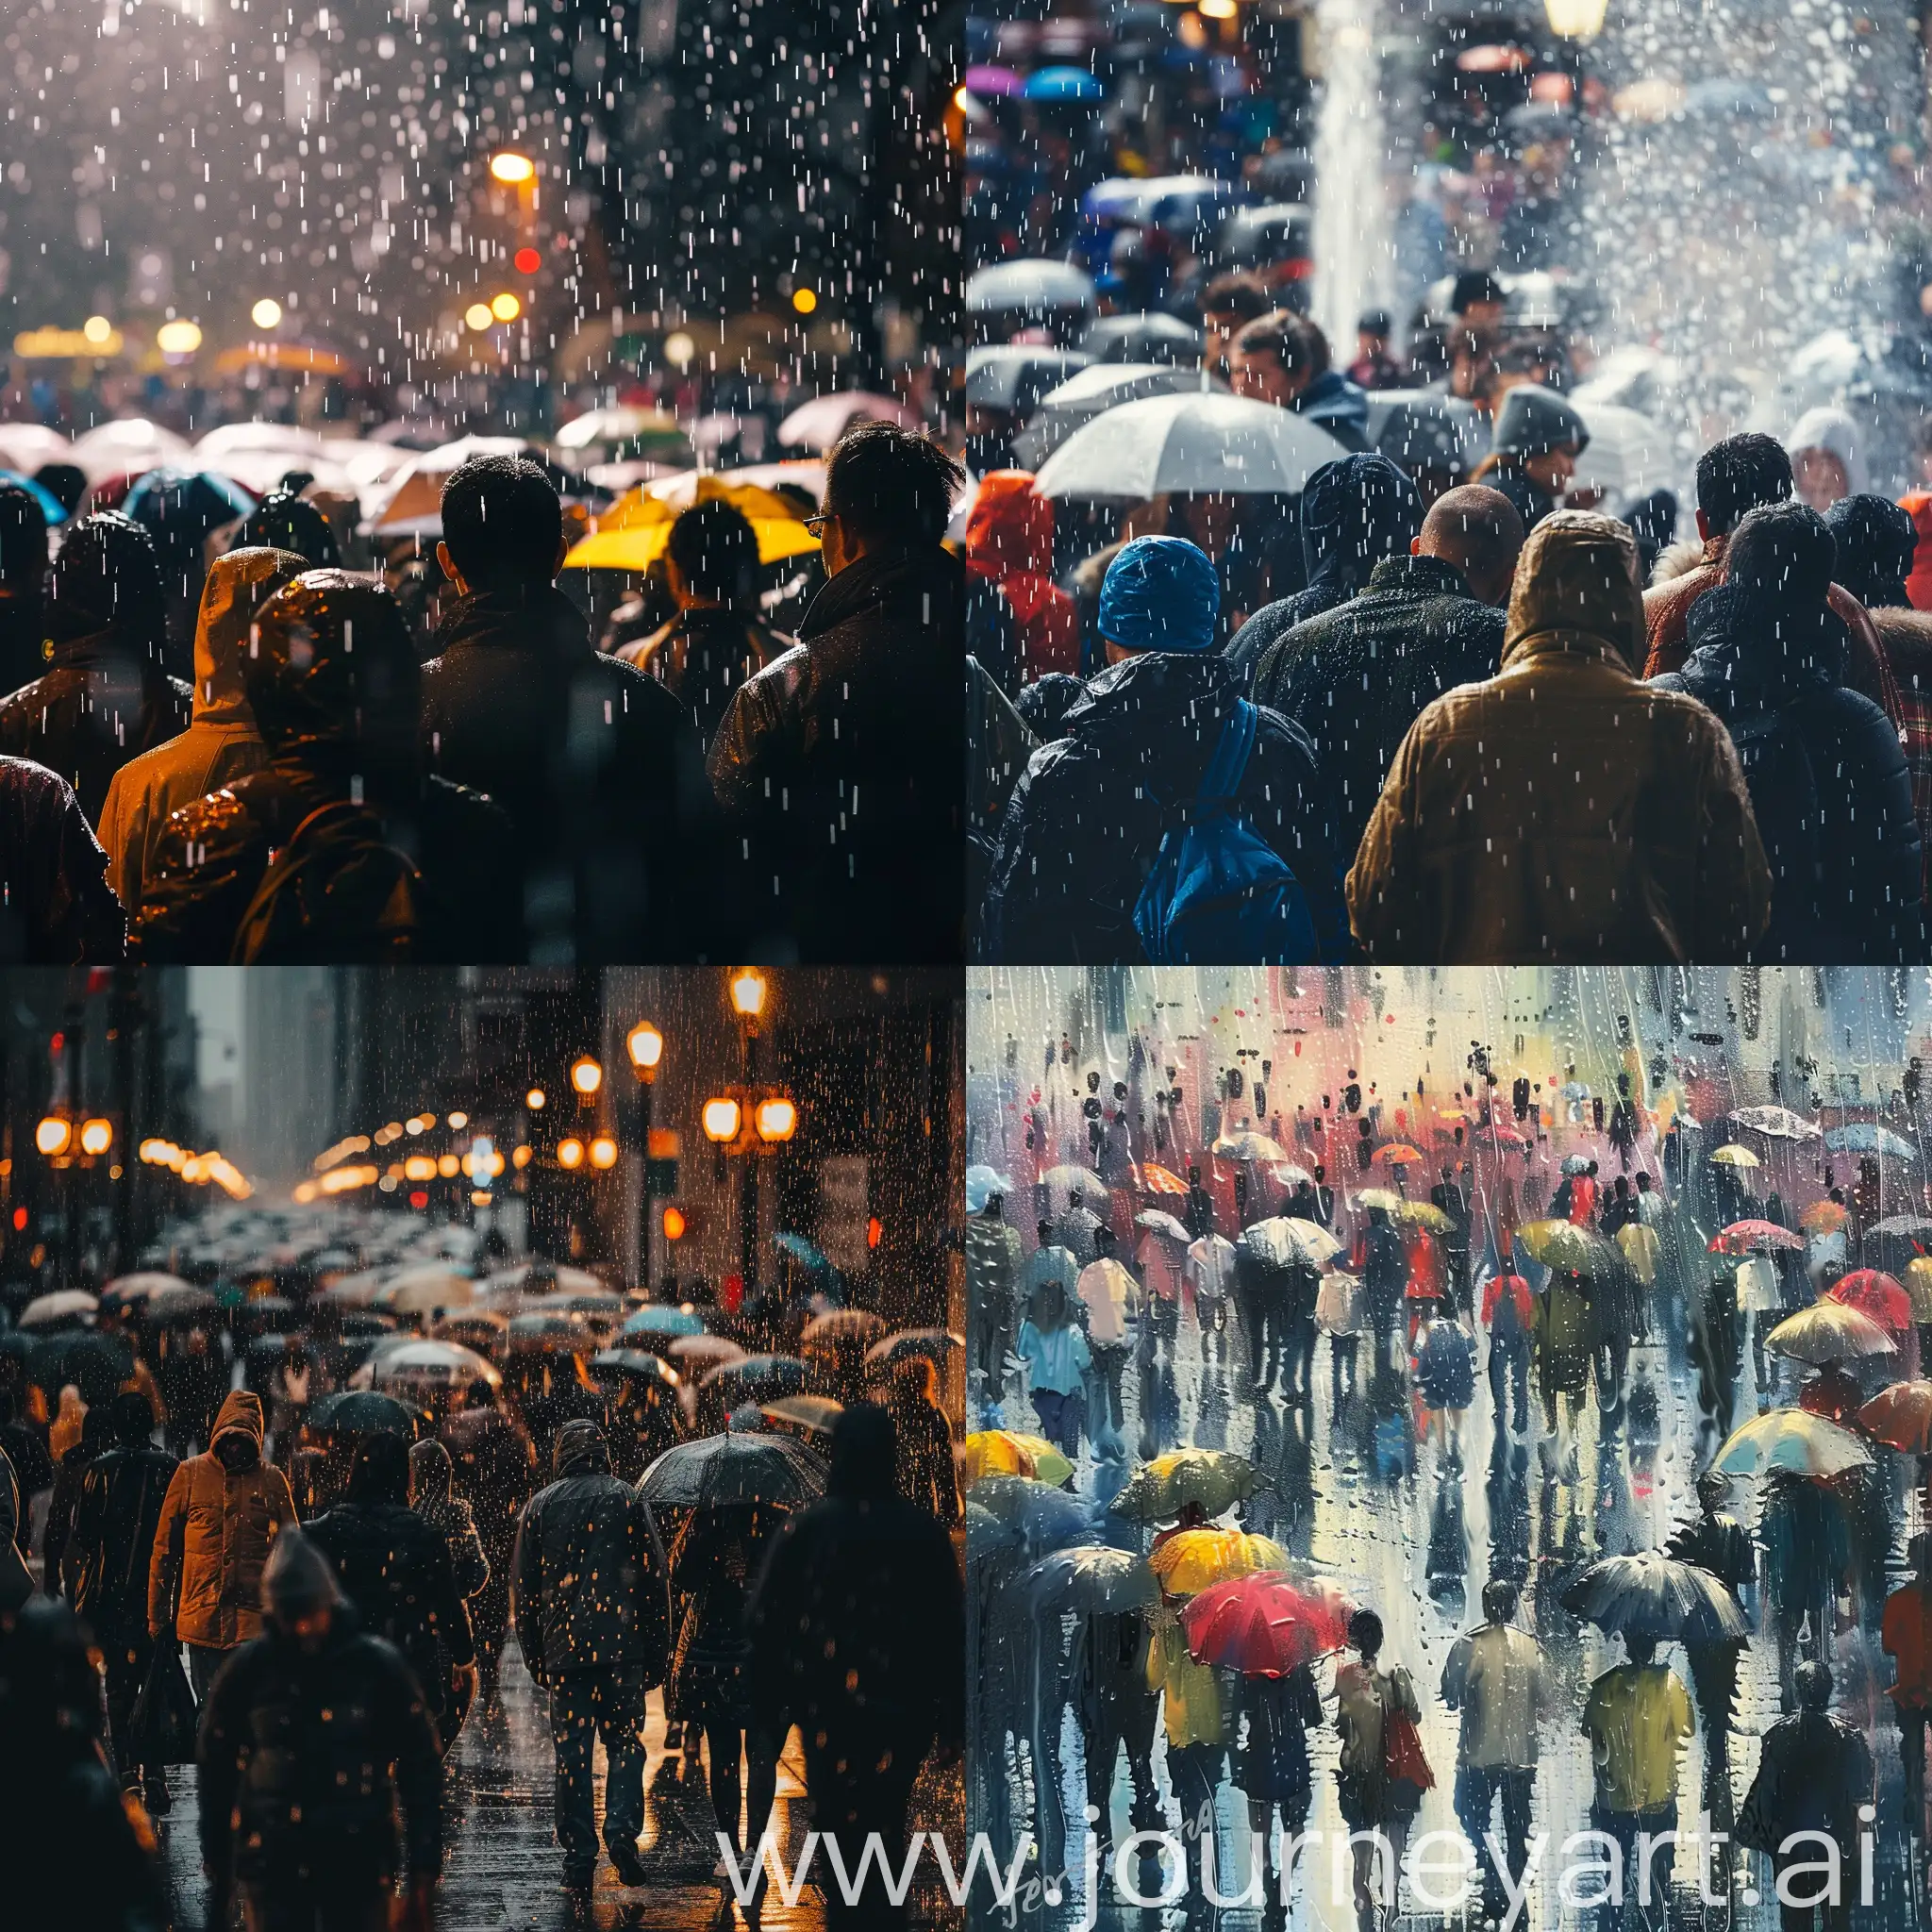 Vibrant-Crowd-of-People-in-Rainy-Urban-Setting